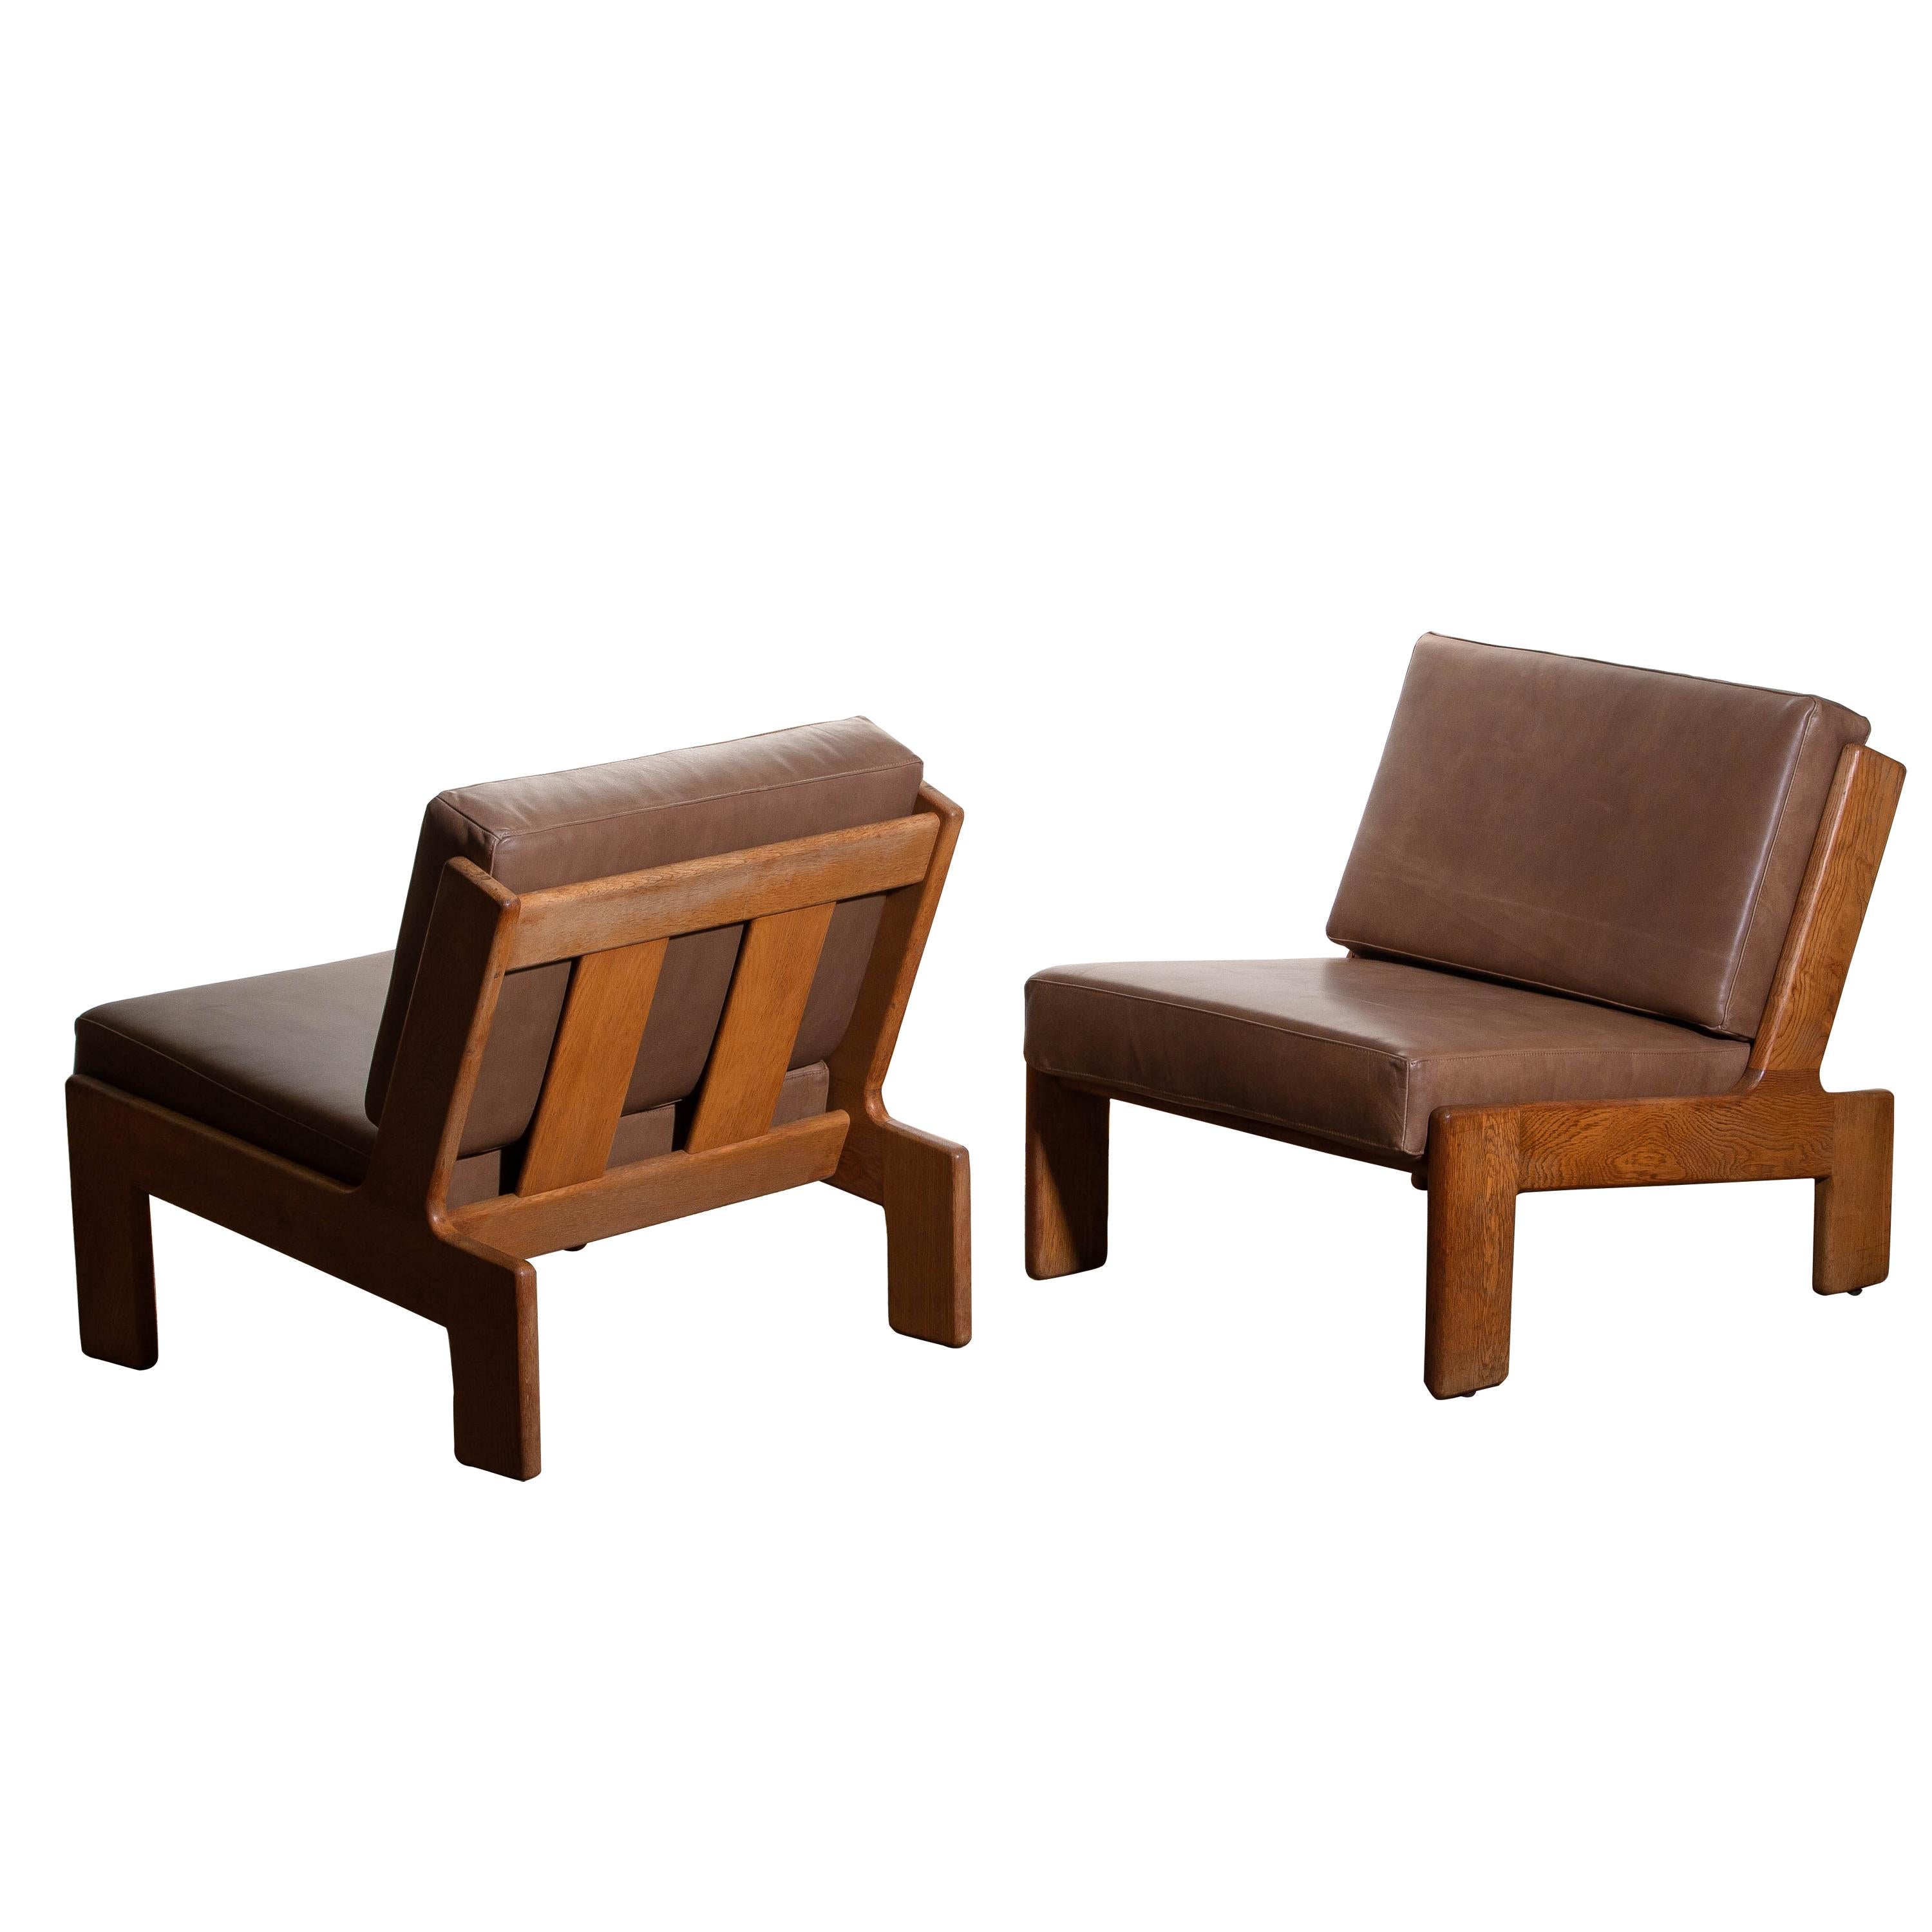 Mid-Century Modern 1960s, Pair of Oak and Leather Cubist Lounge Chairs by Esko Pajamies for Asko